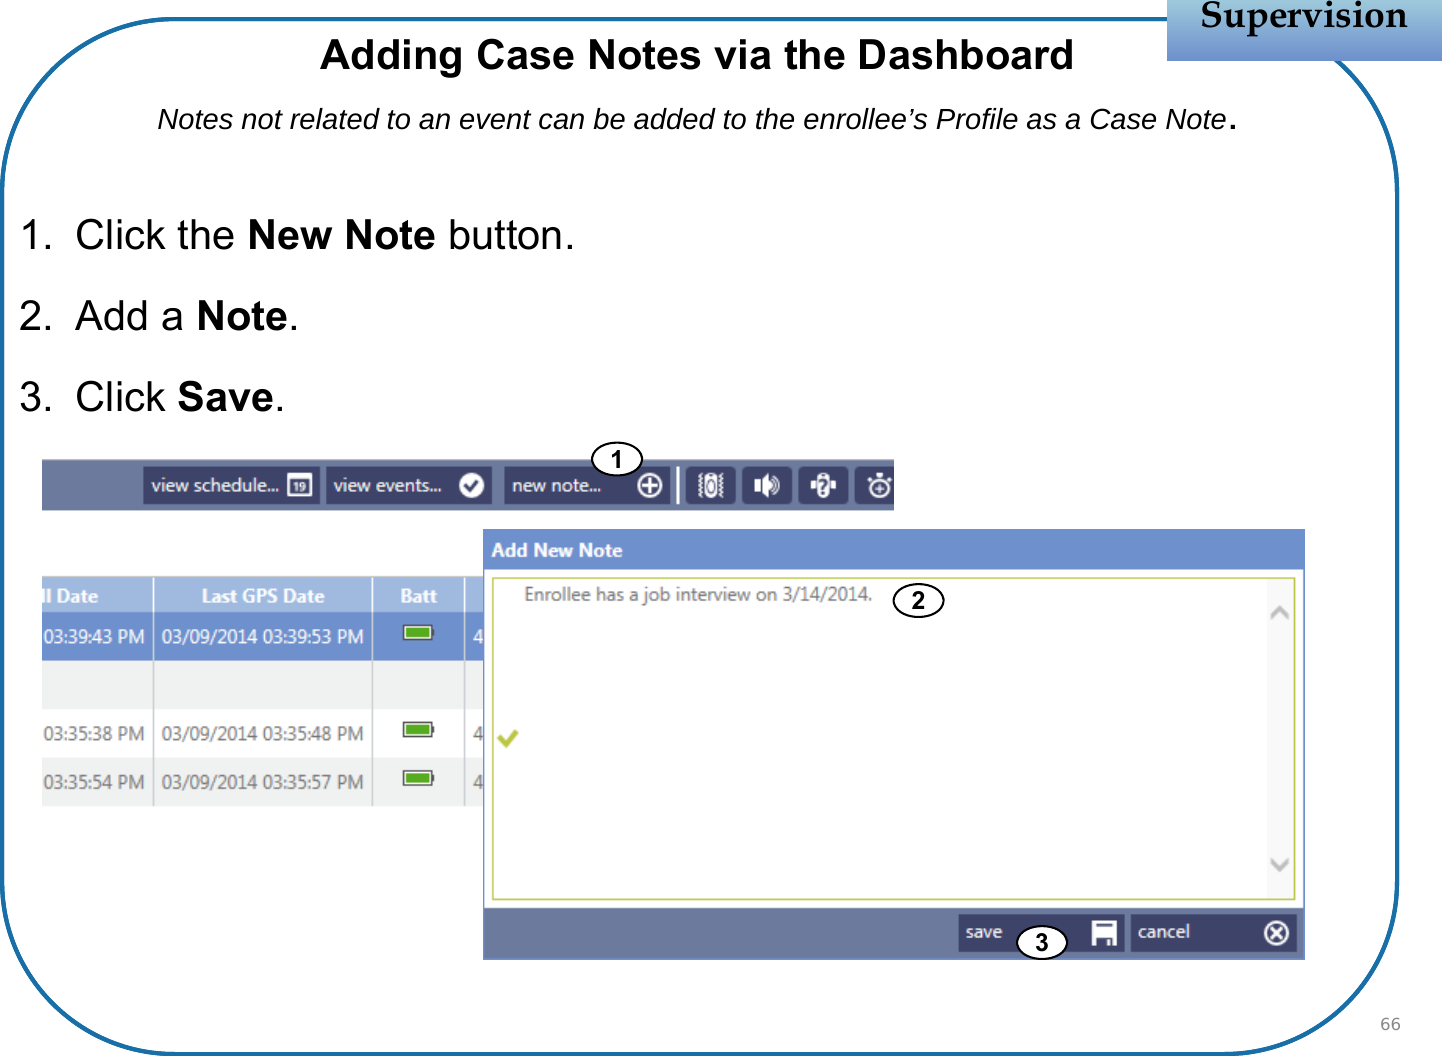 132SupervisionSupervisionAdding Case Notes via the DashboardNotes not related to an event can be added to the enrollee’s Profile as a Case Note.1. Click the New Note button.2. Add a Note.3. Click Save.66